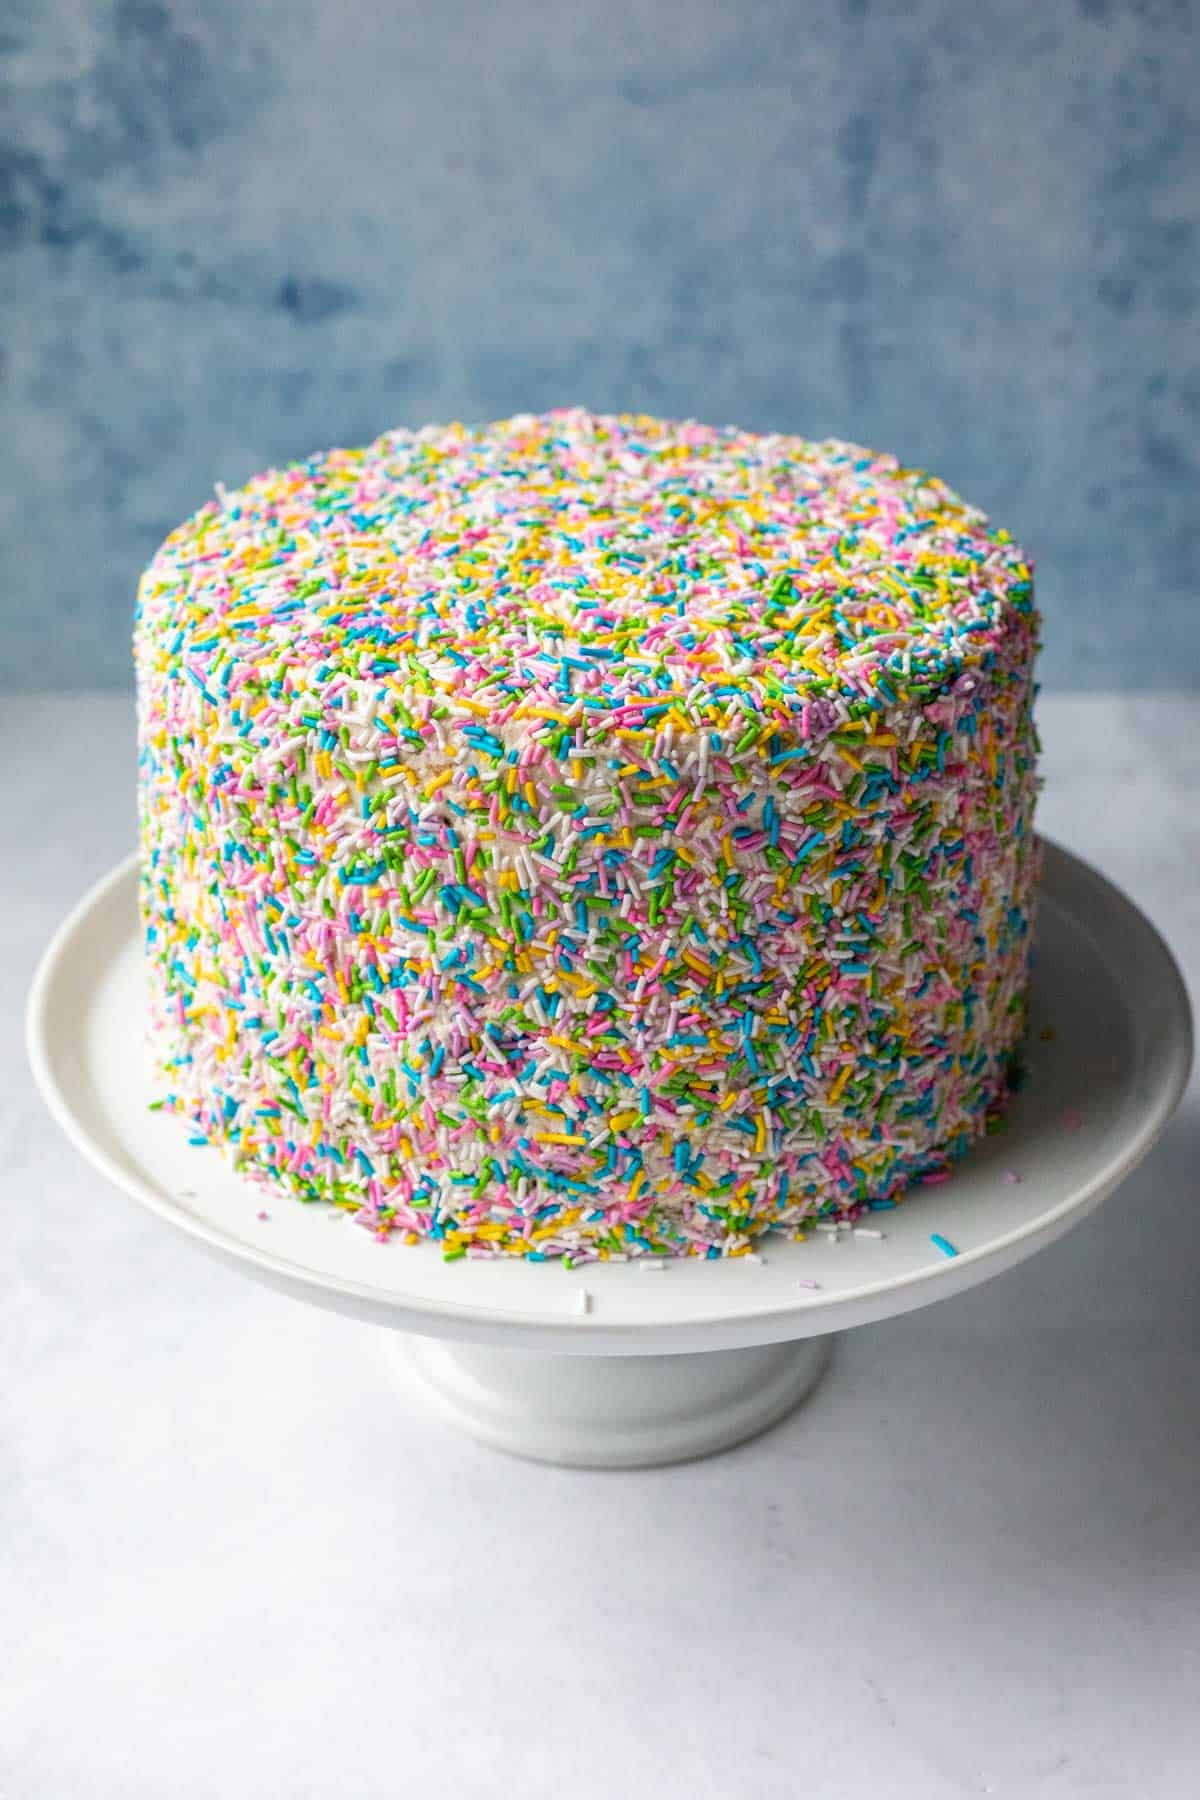 A 3-layer vegan vanilla cake coated in sprinkles resting on a white cake stand.